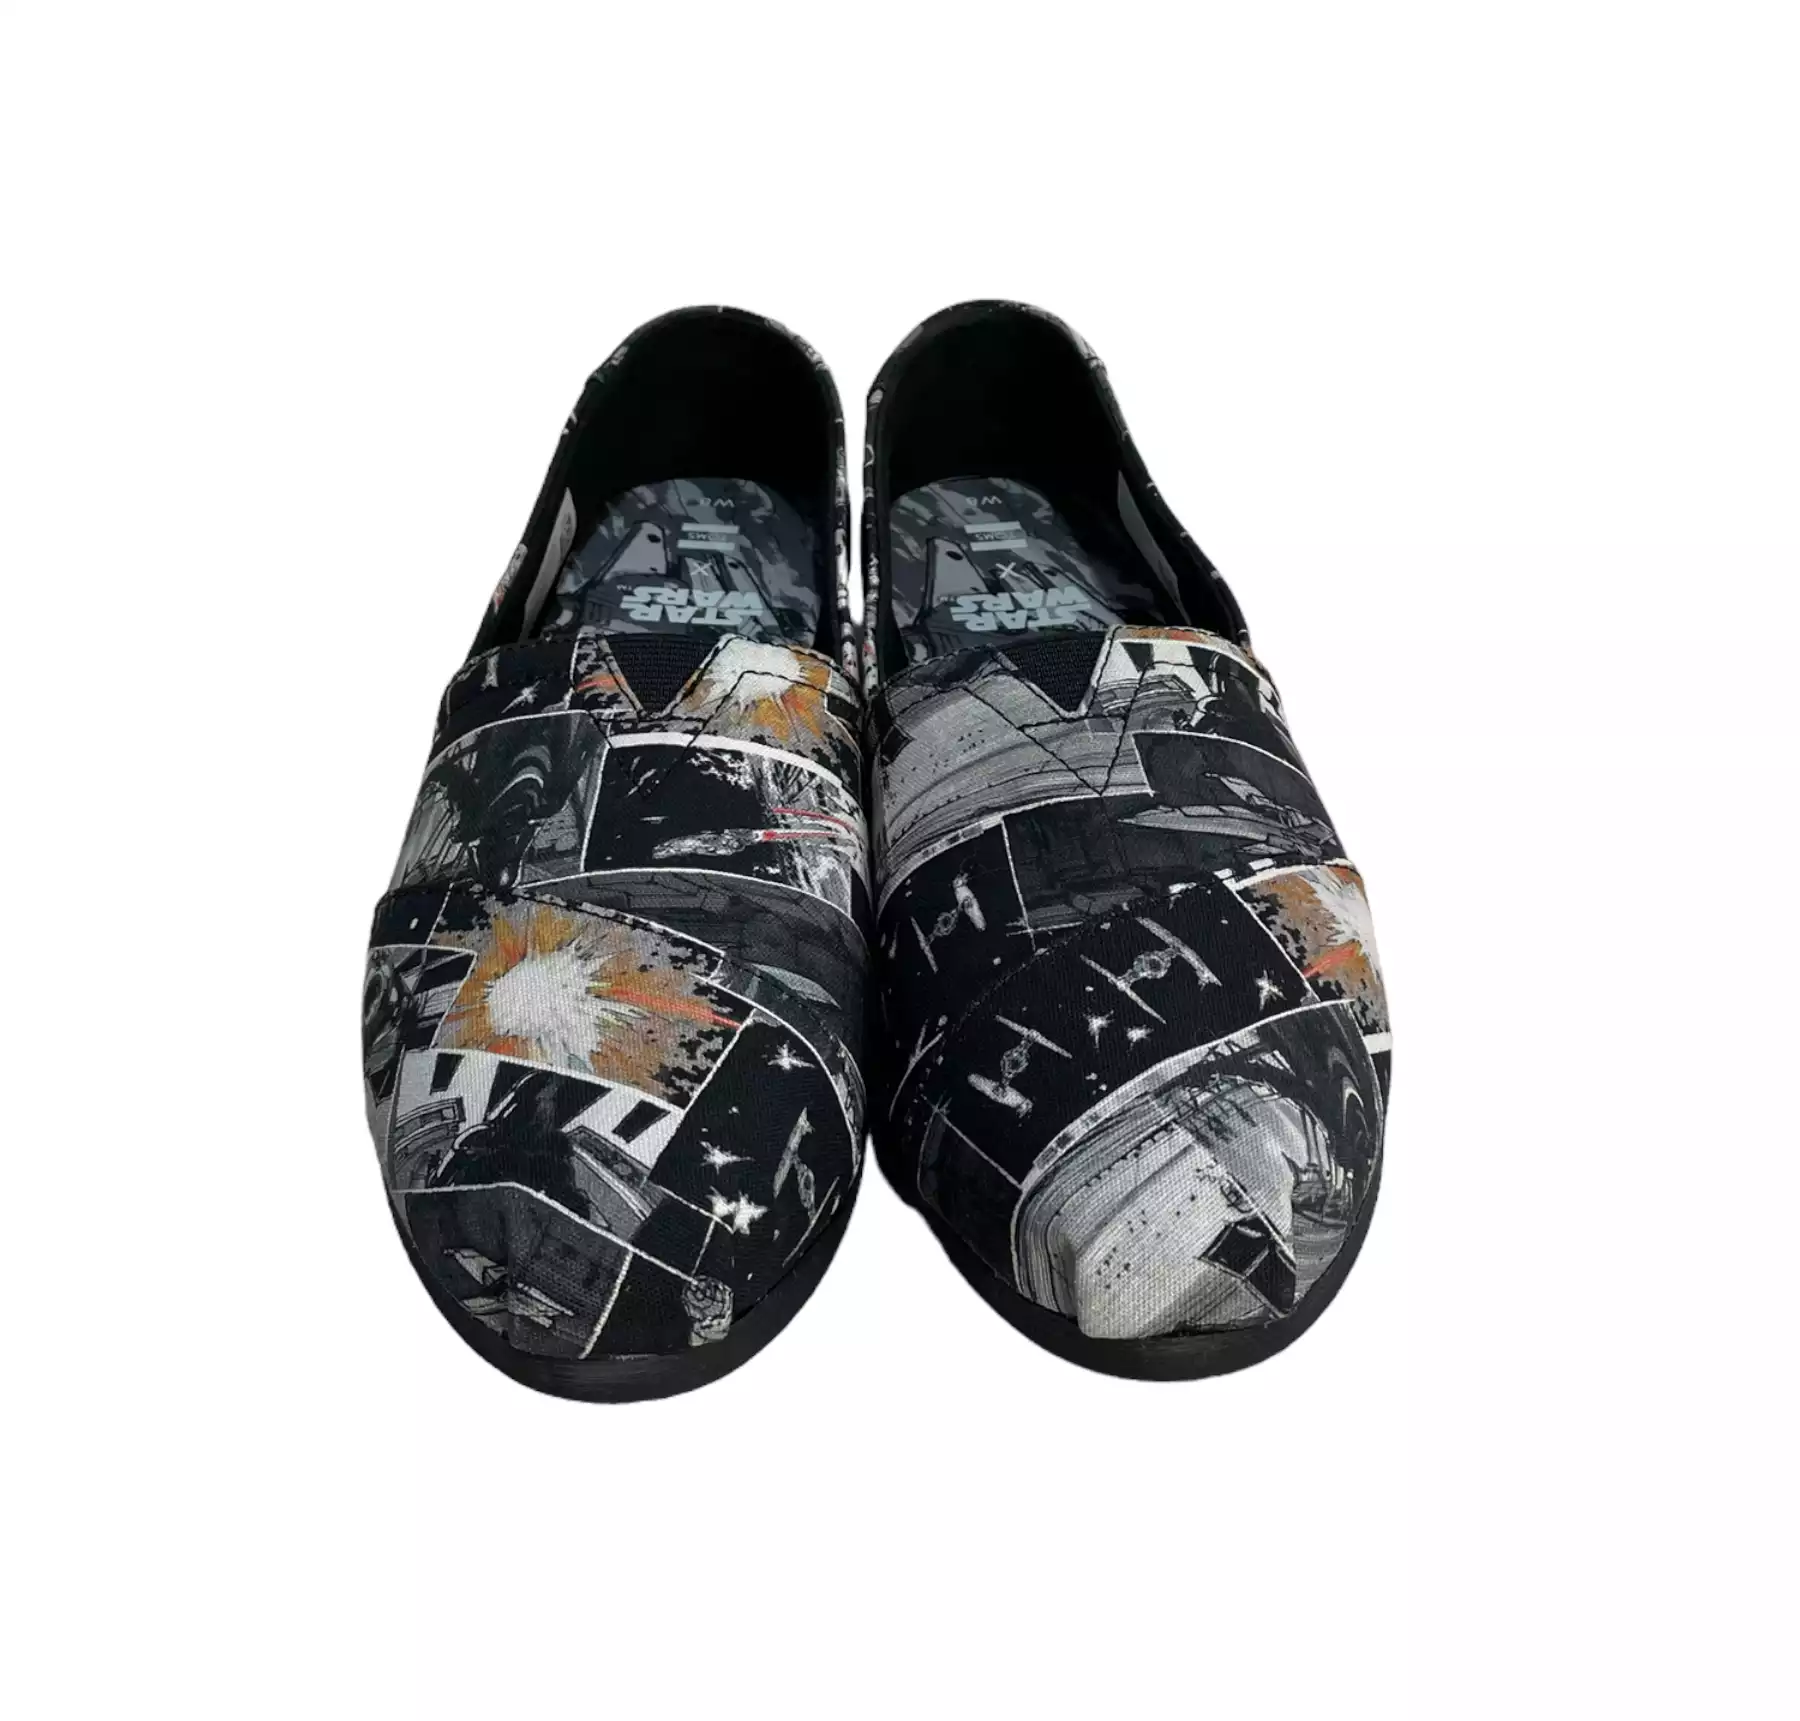 Shoes by Star Wars X Toms